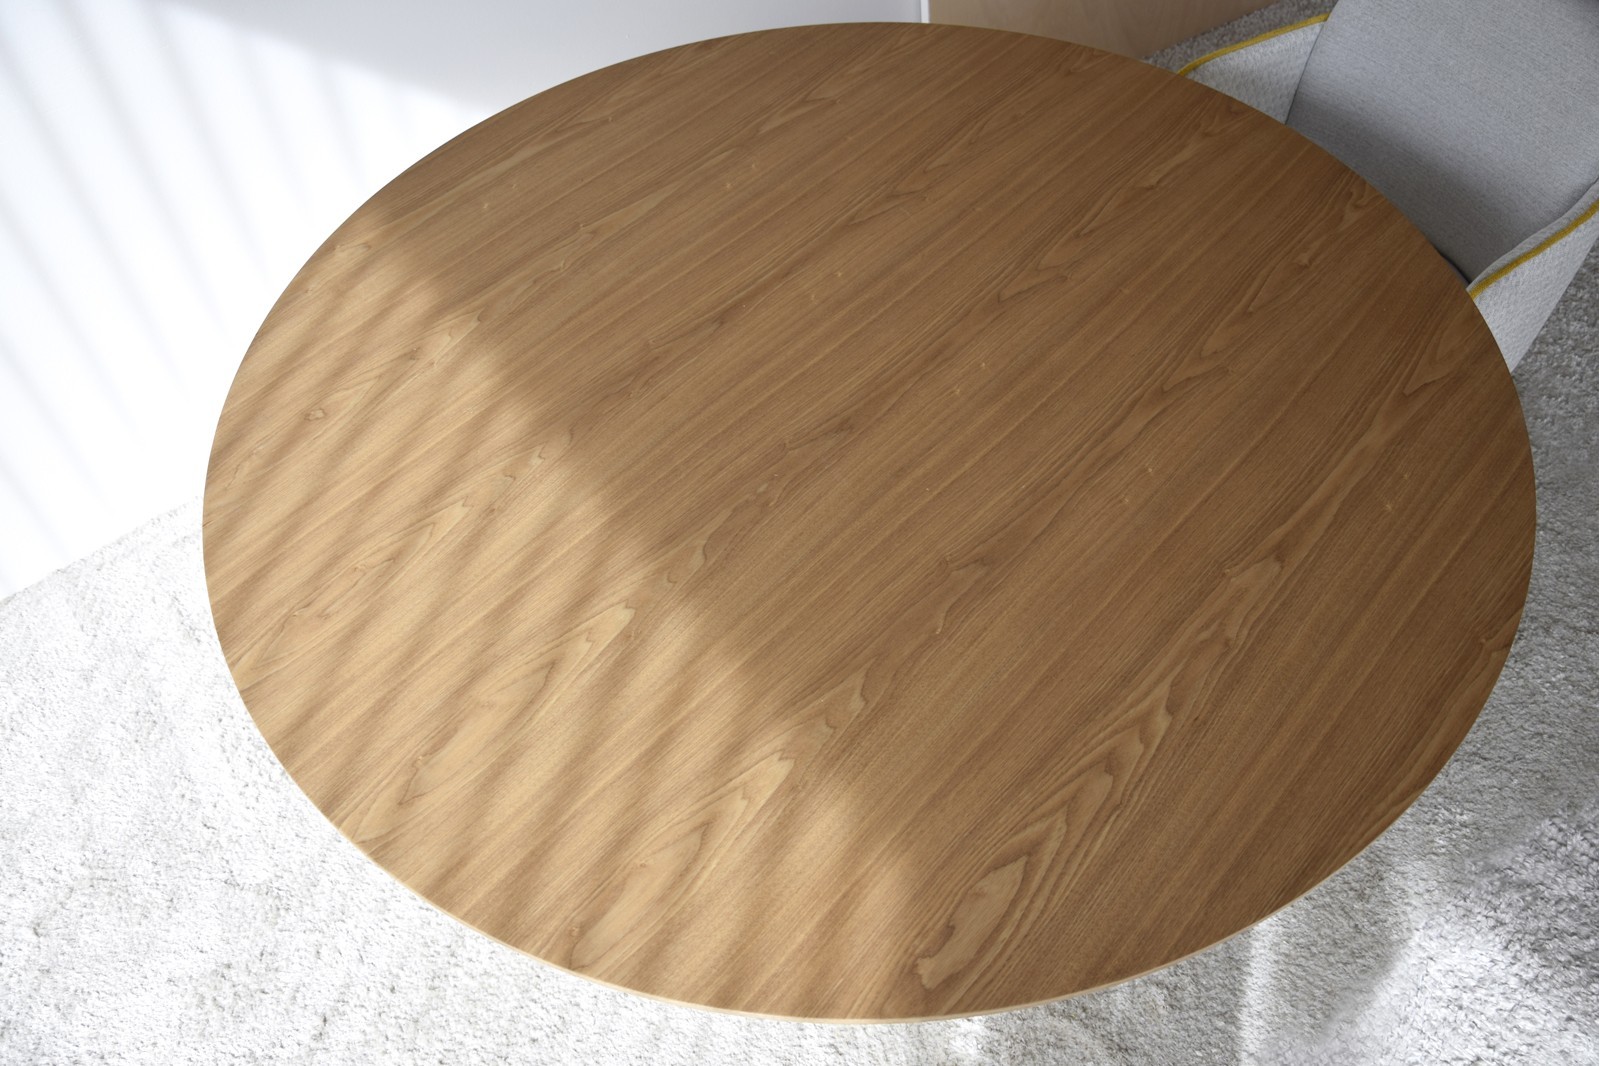 ROUND DINIGN TABLE. NATURAL ASH AND WARM GREY.